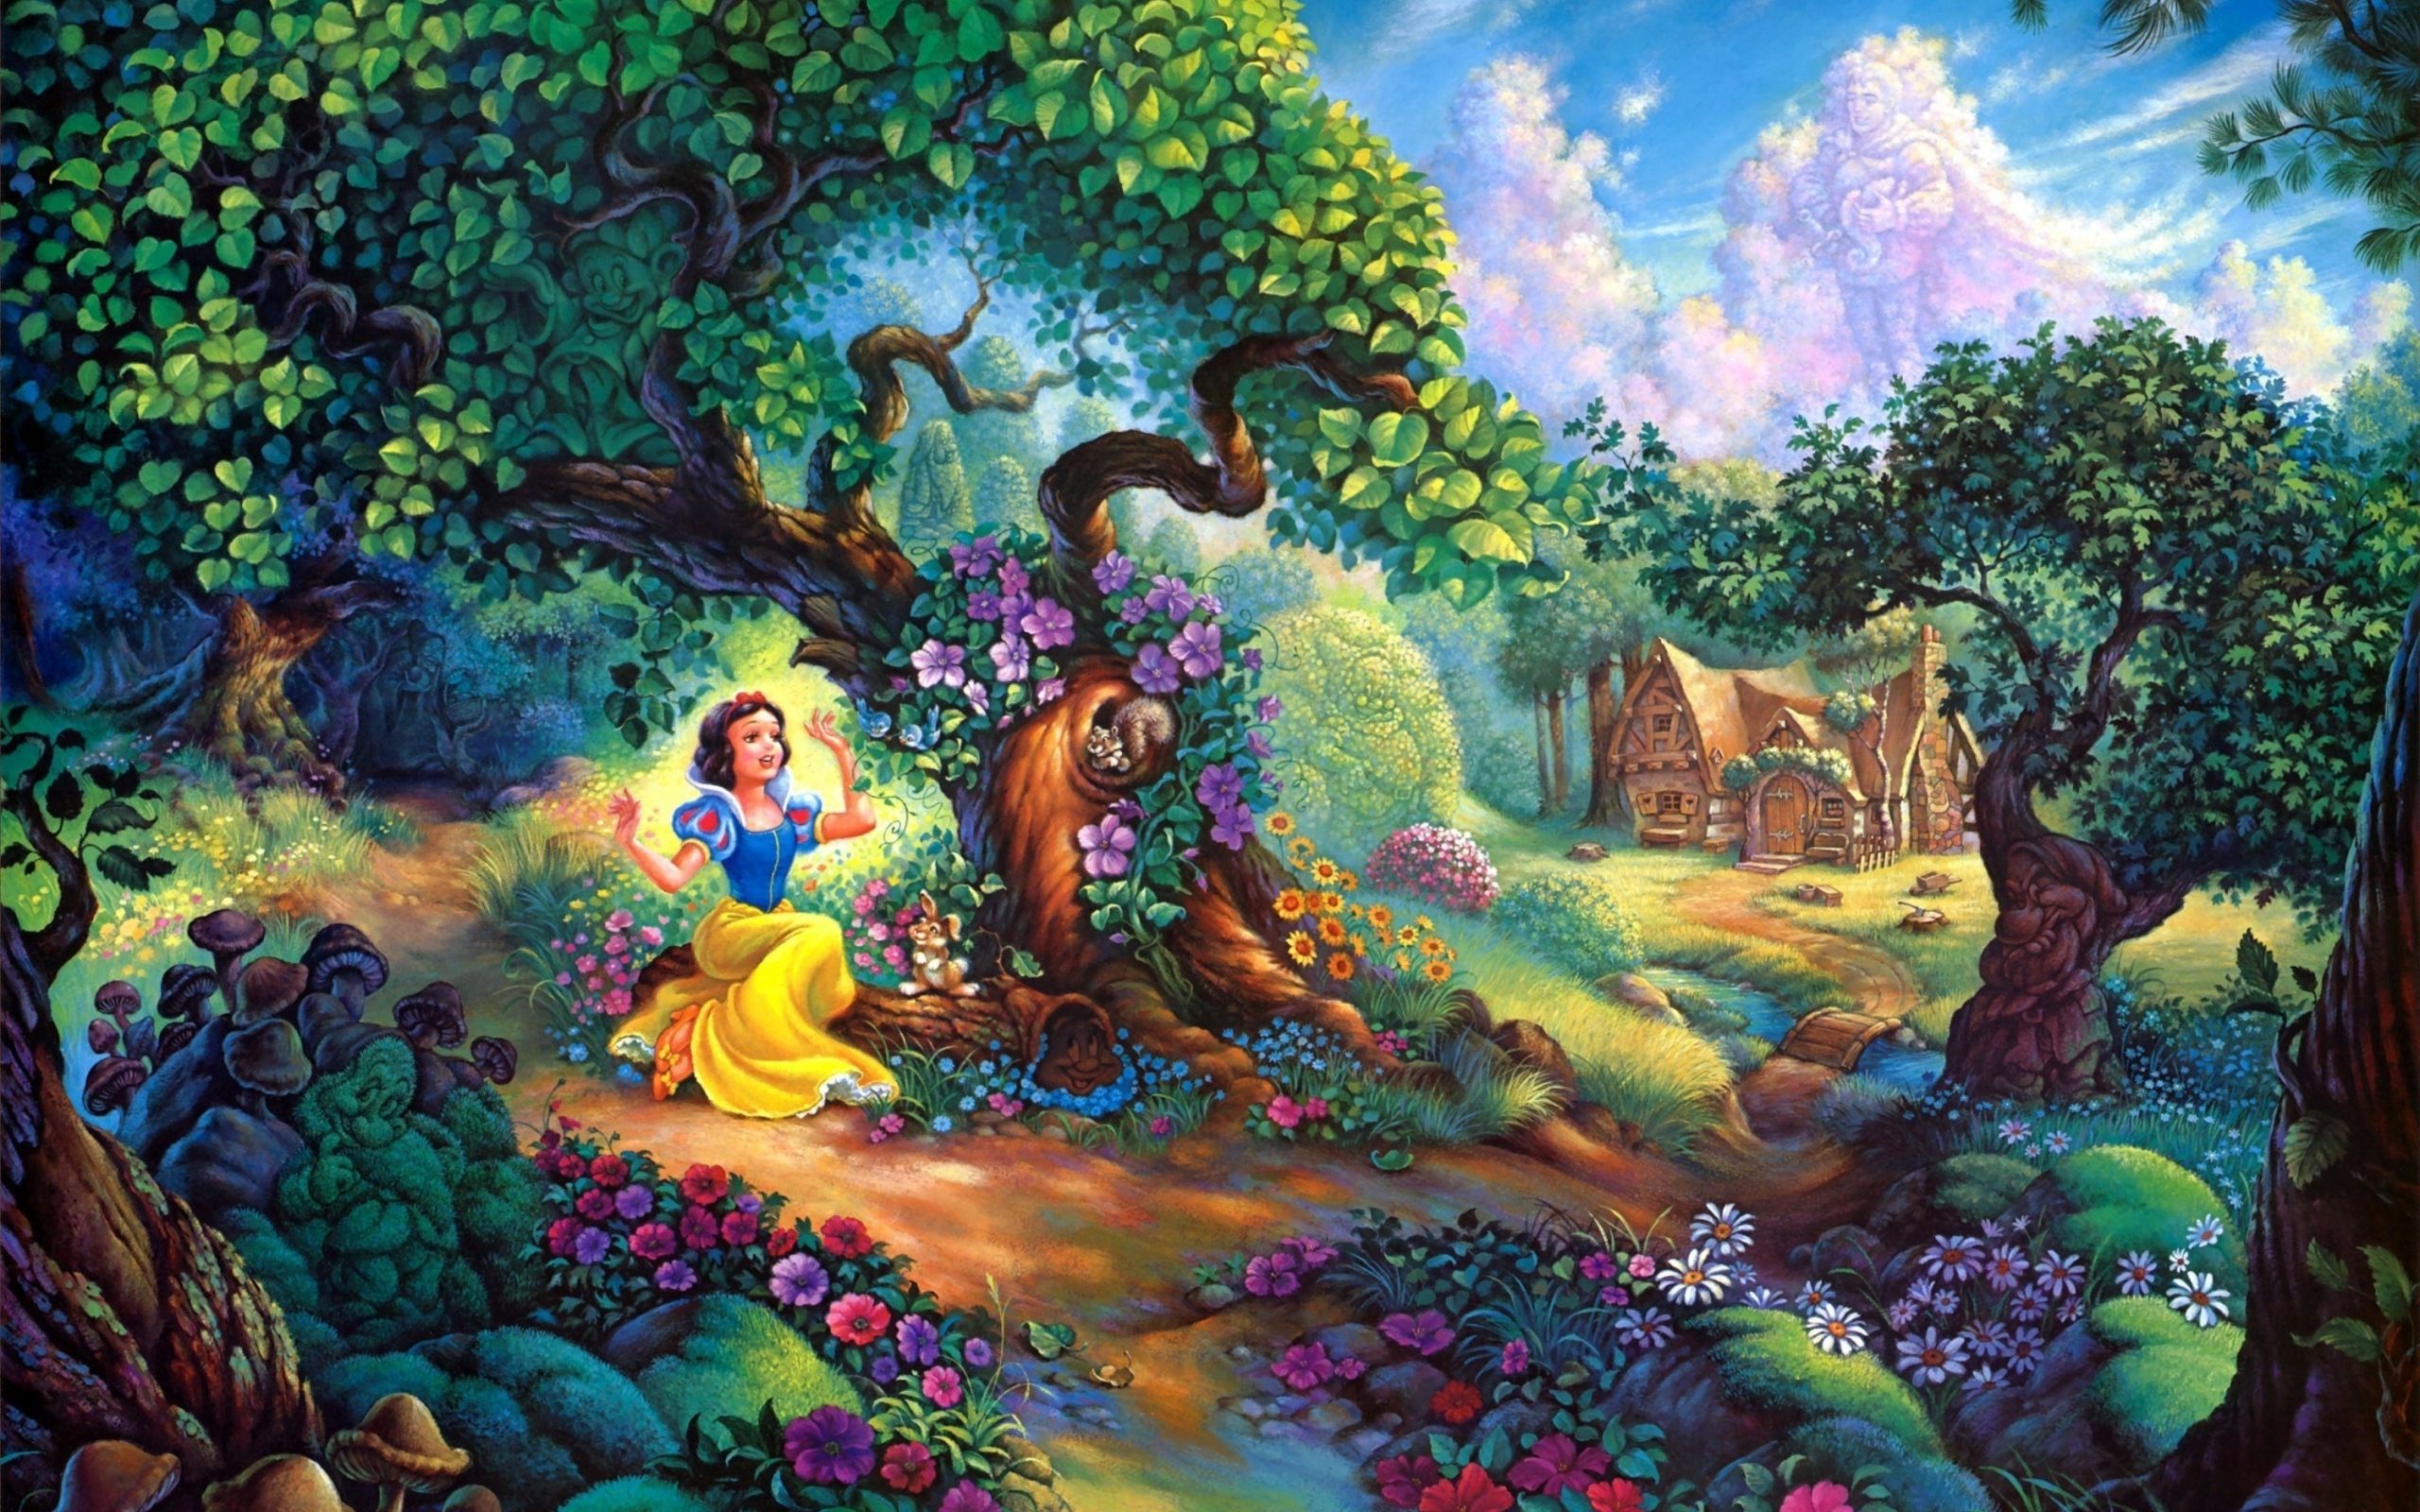 Disney Wallpapers   HD Wallpapers Backgrounds of Your Choice